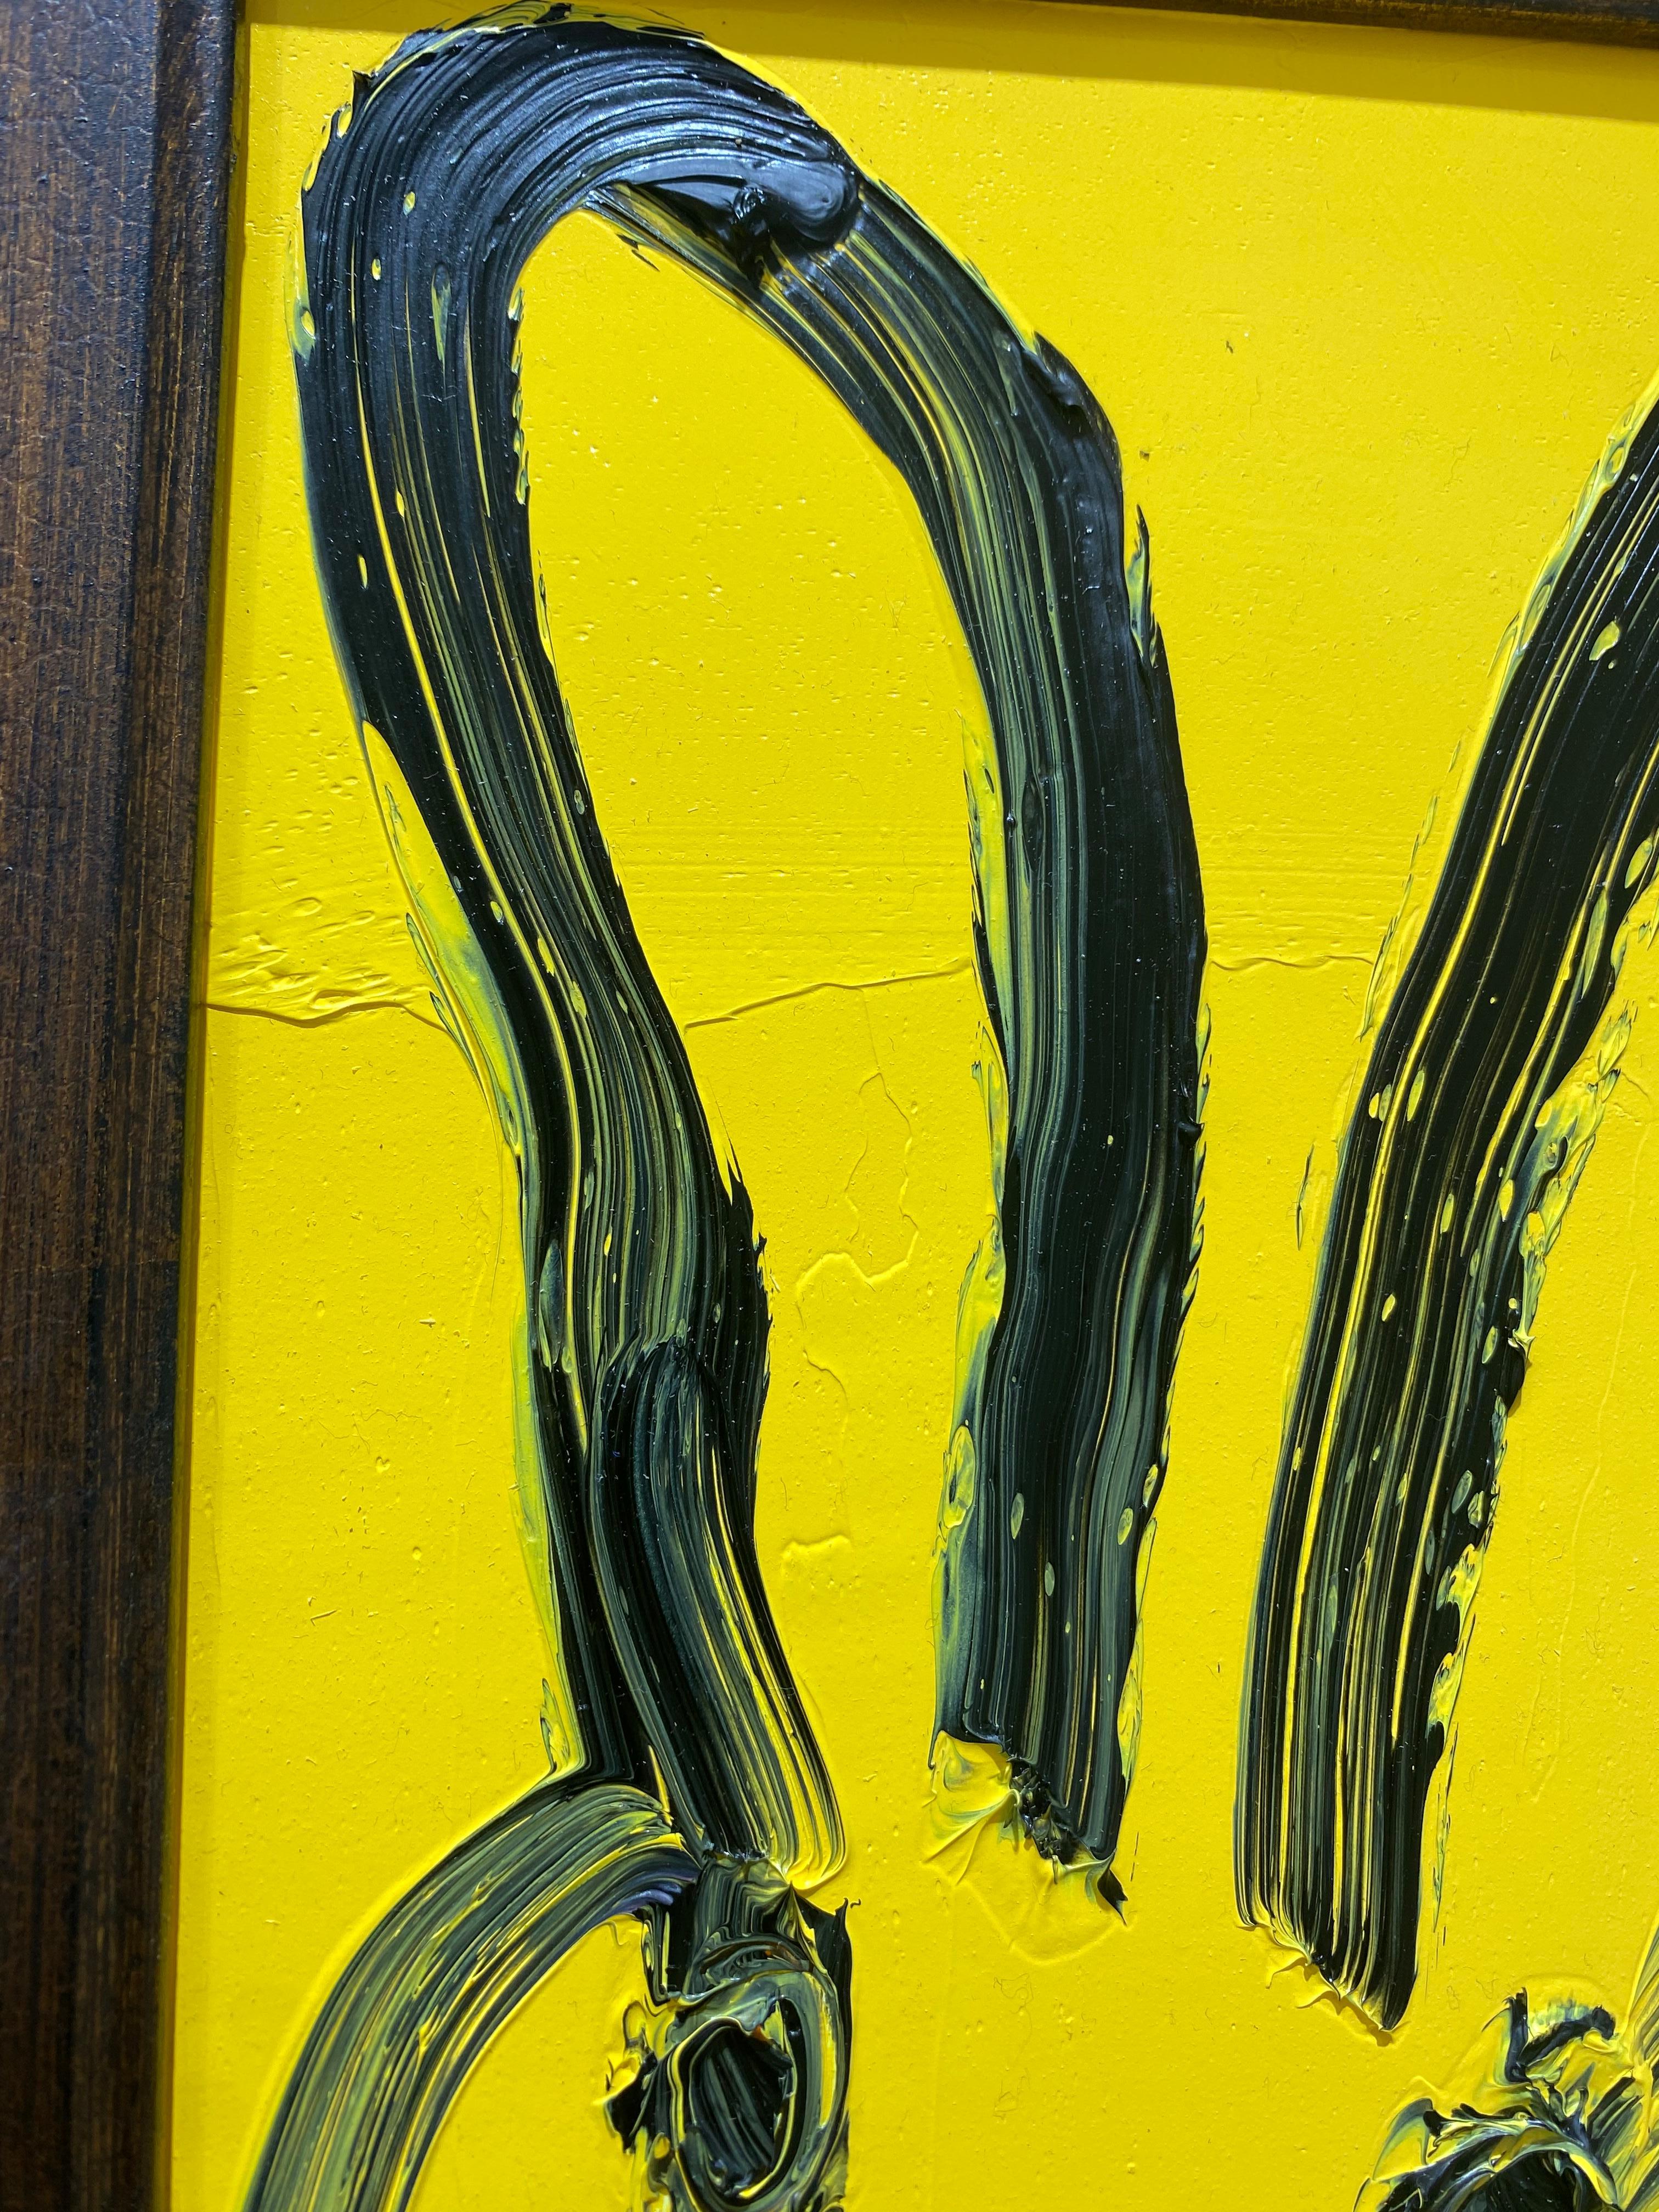 Jackie, 2022
Oil on Wood
Black outline bunny, yellow

Frame collected by the artist
